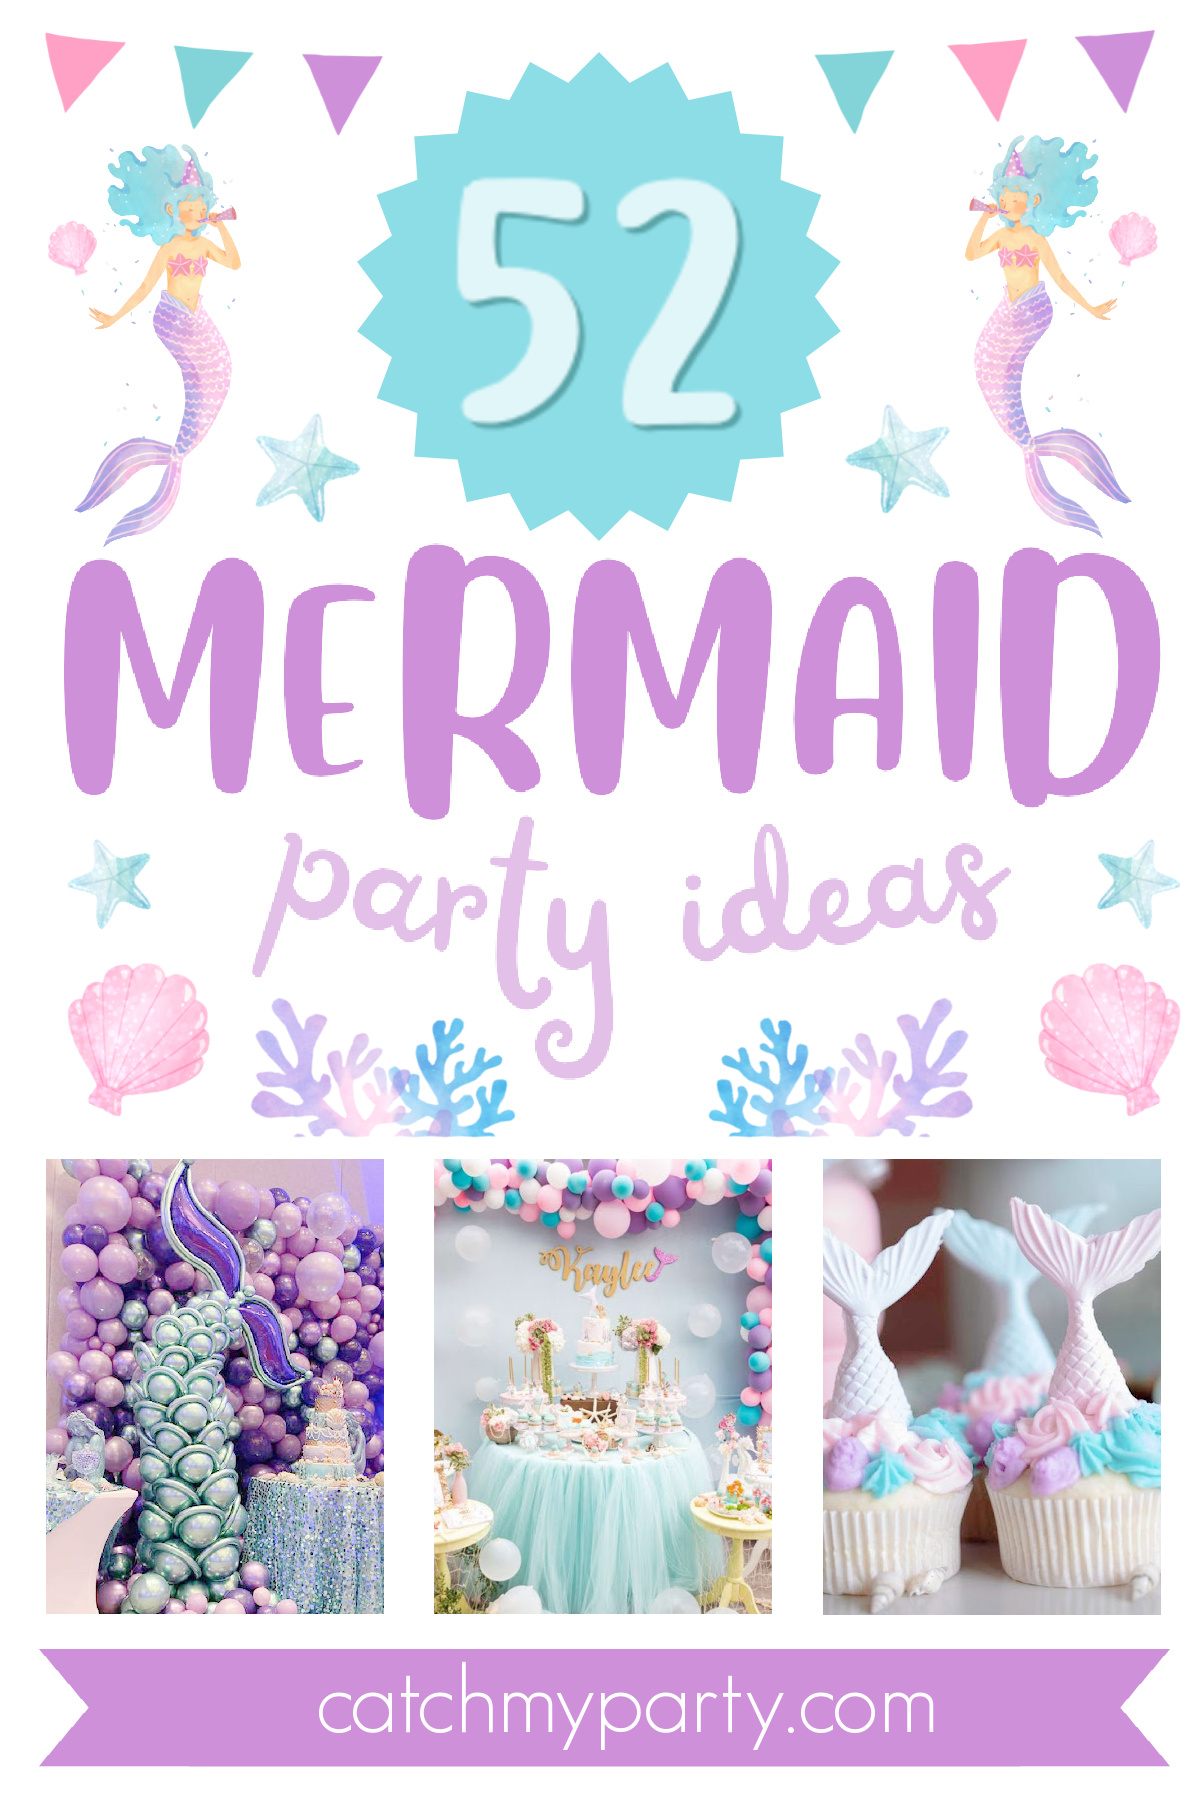 52 Ideas for Throwing the Ultimate Mermaid Under the Sea Birthday Party!